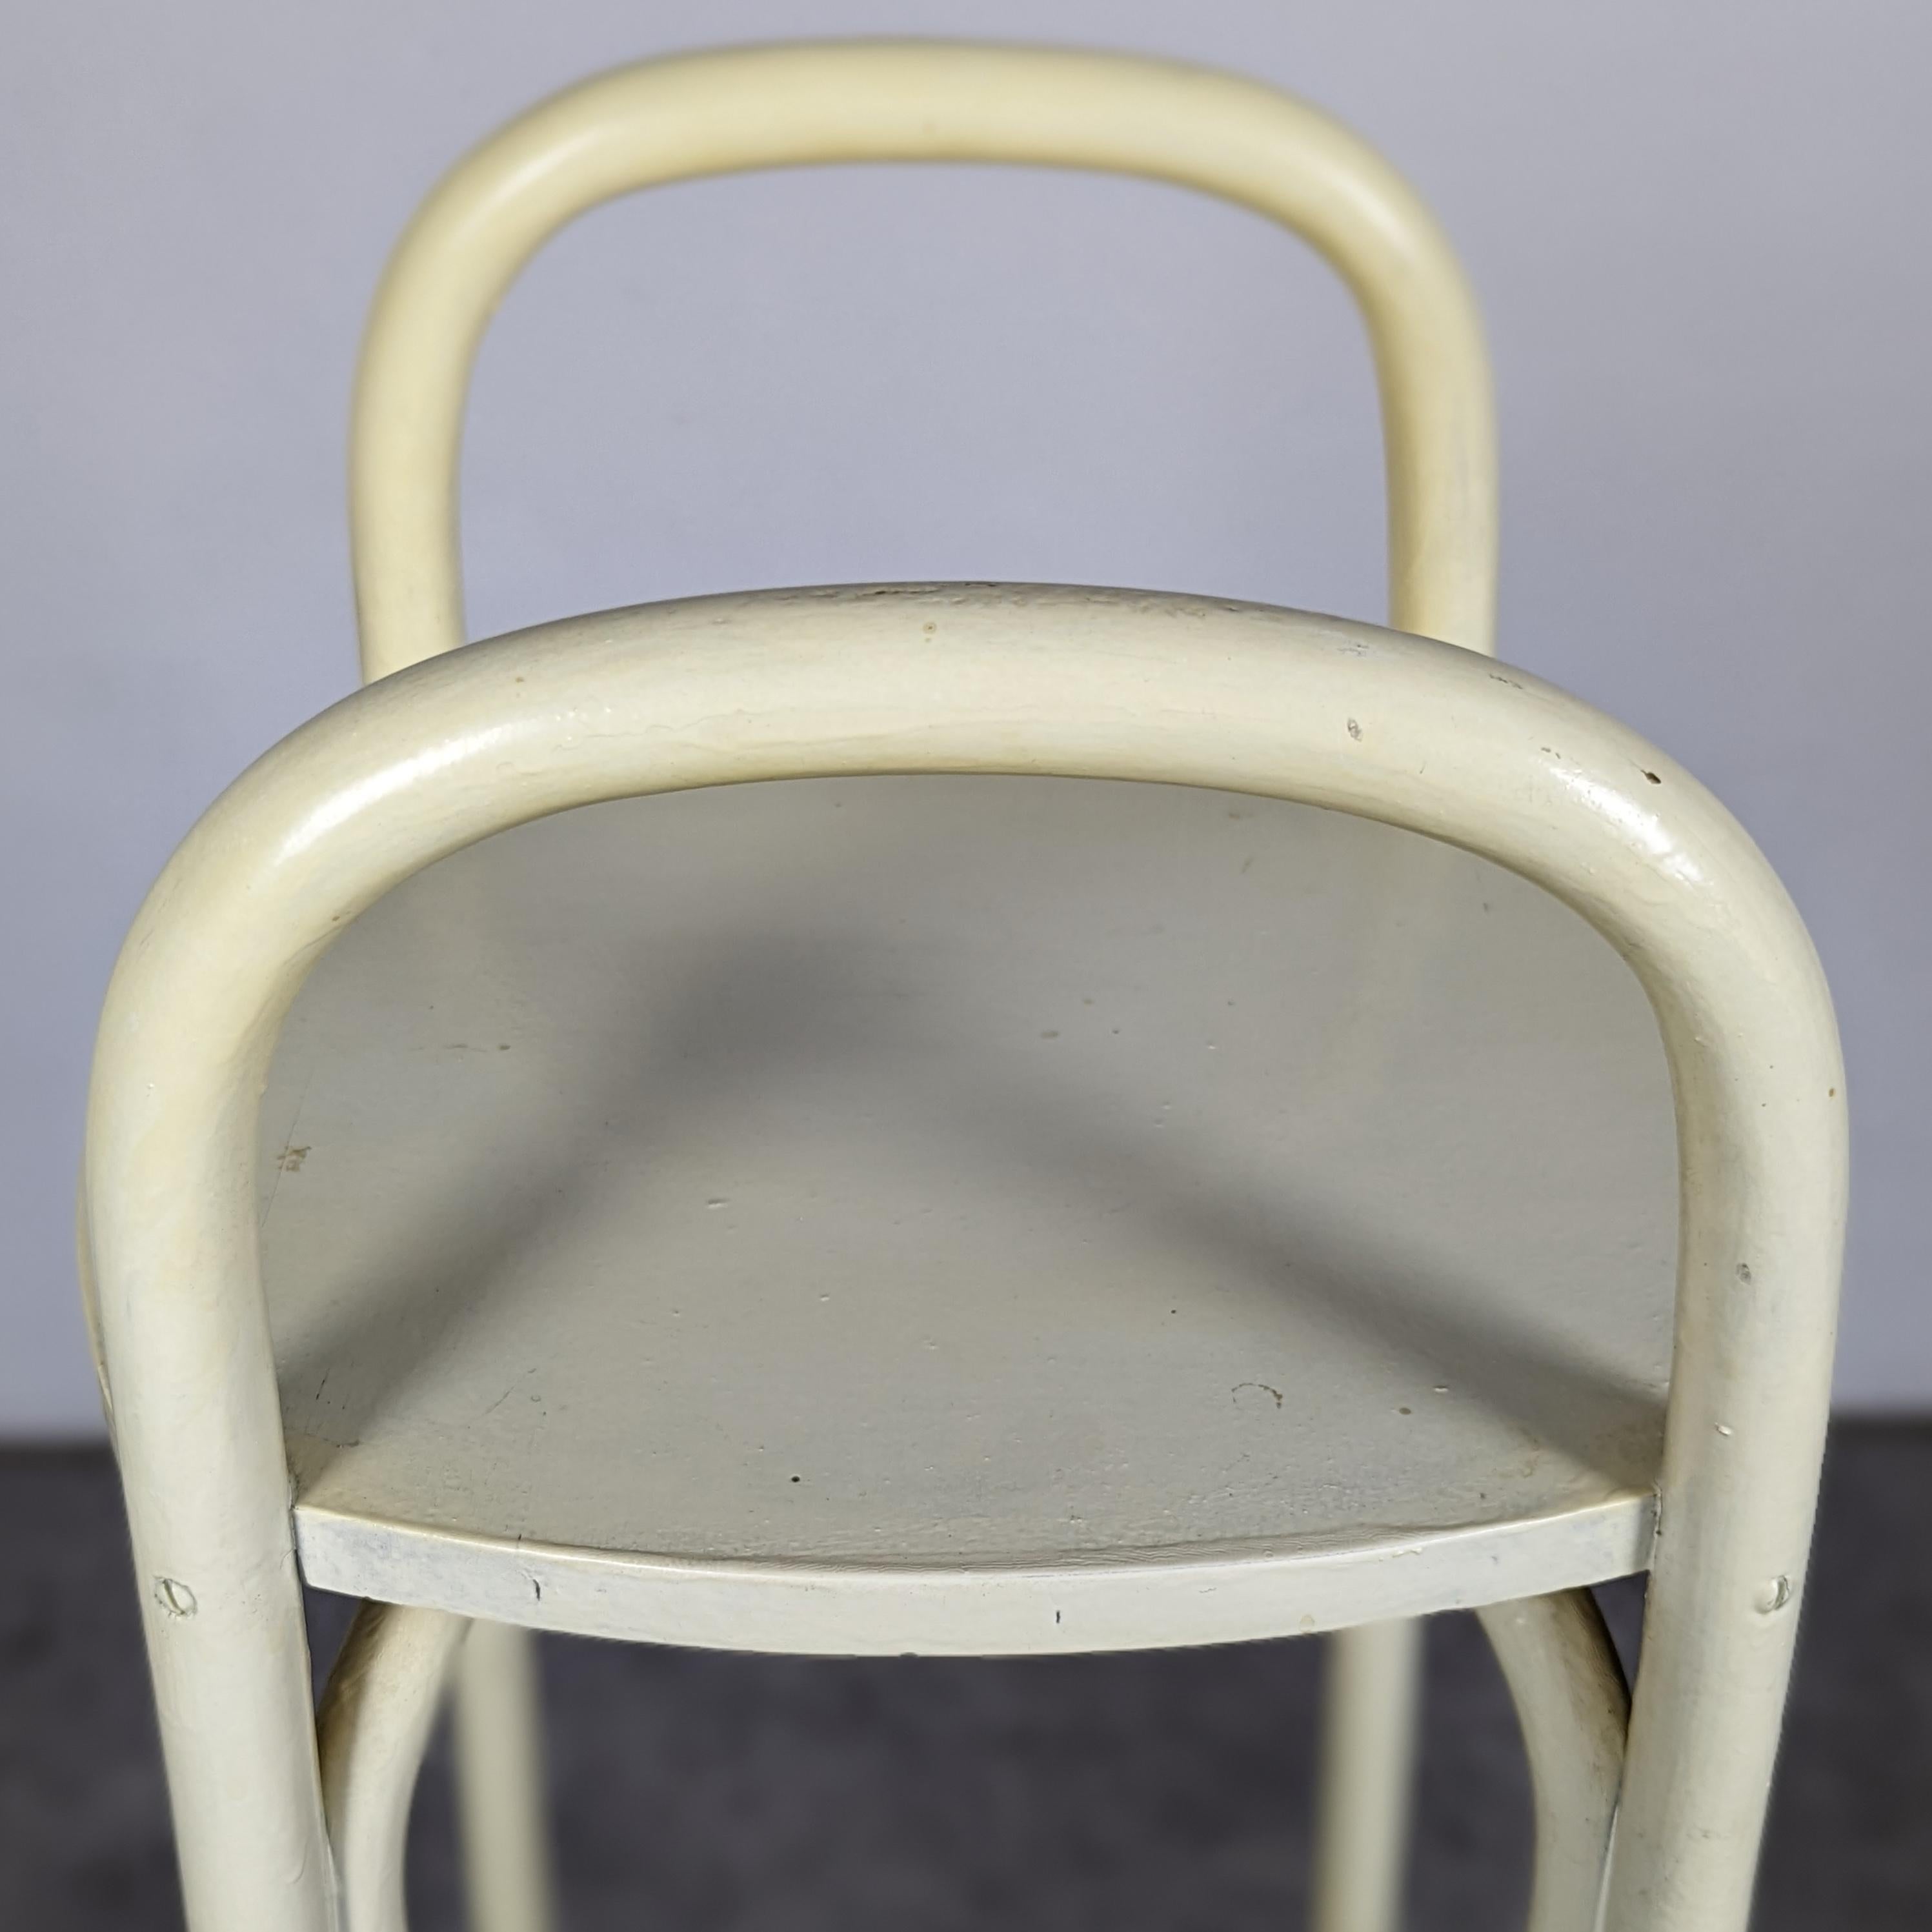 Early 20th Century Rare Thonet Nr. 21 plant stand by Josef Hoffmann For Sale